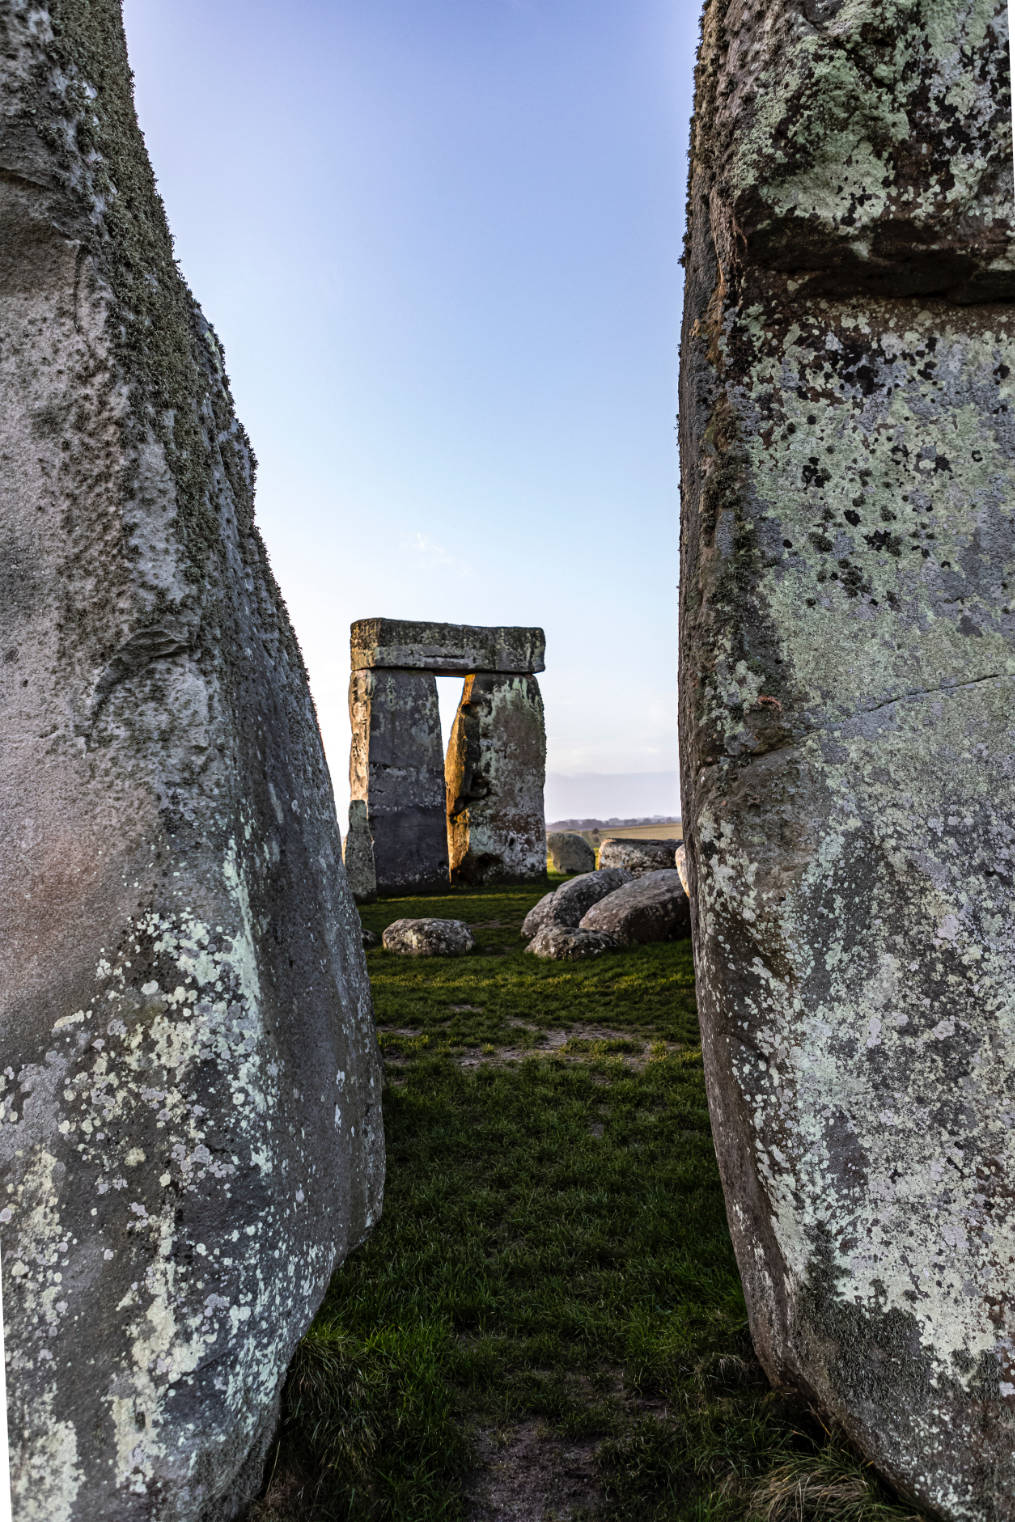 Prehistoric ritual site of Stonehenge with monoliths in England